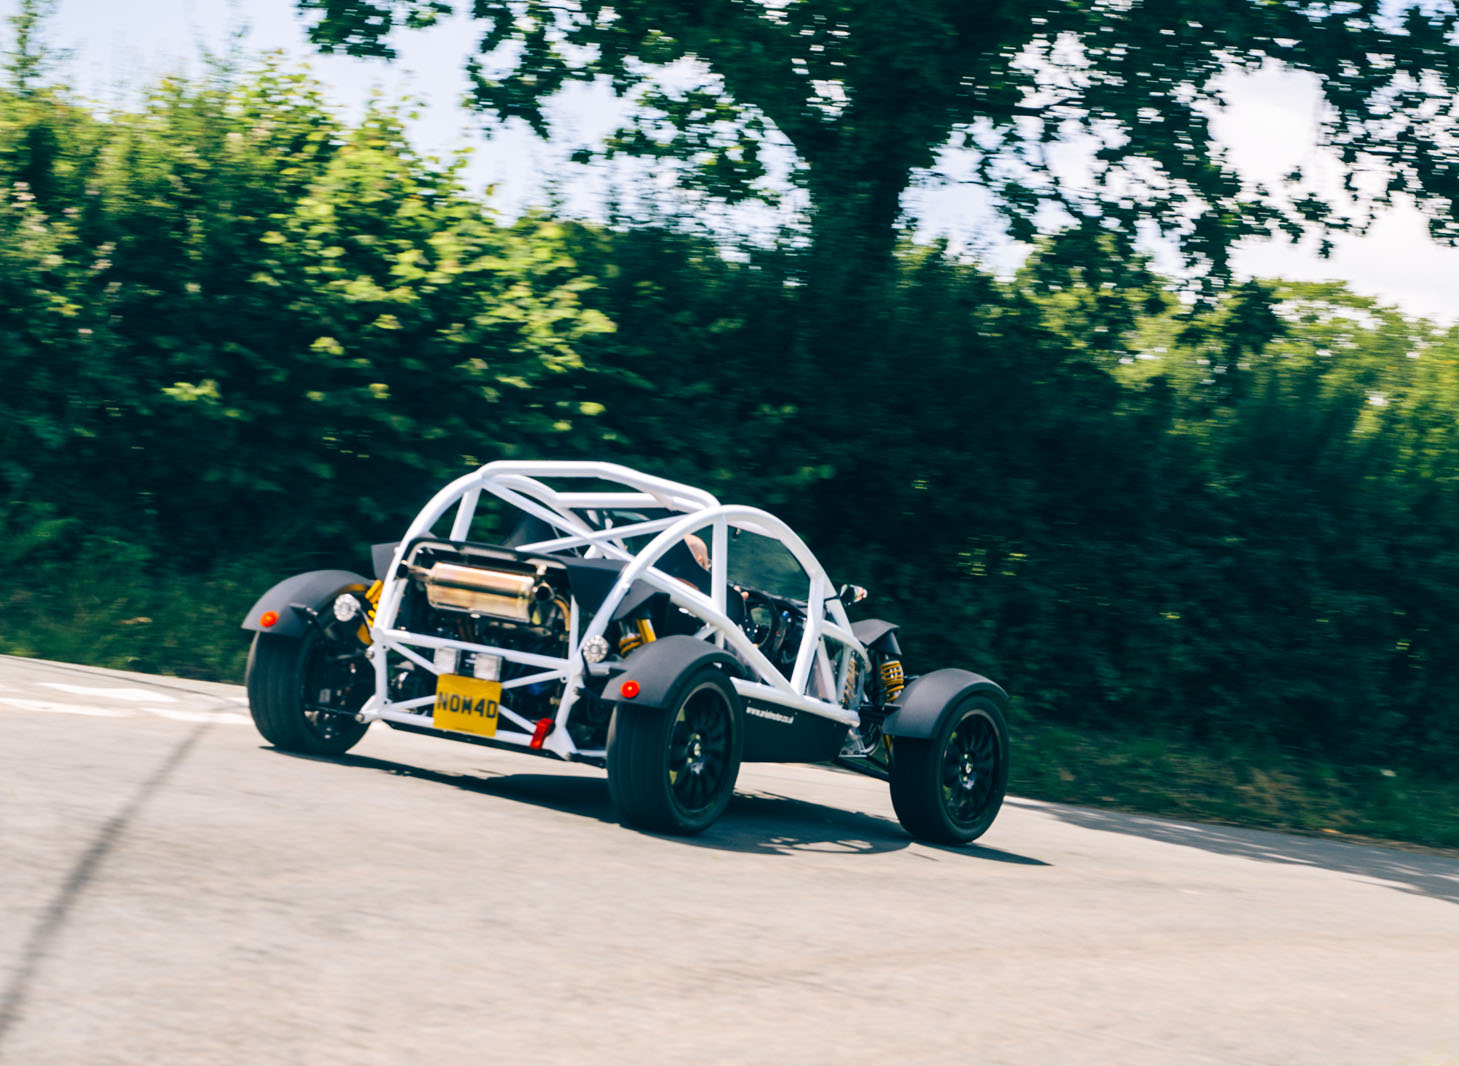 Ariel Nomad R Review Faster 335bhp Lightweight Tested